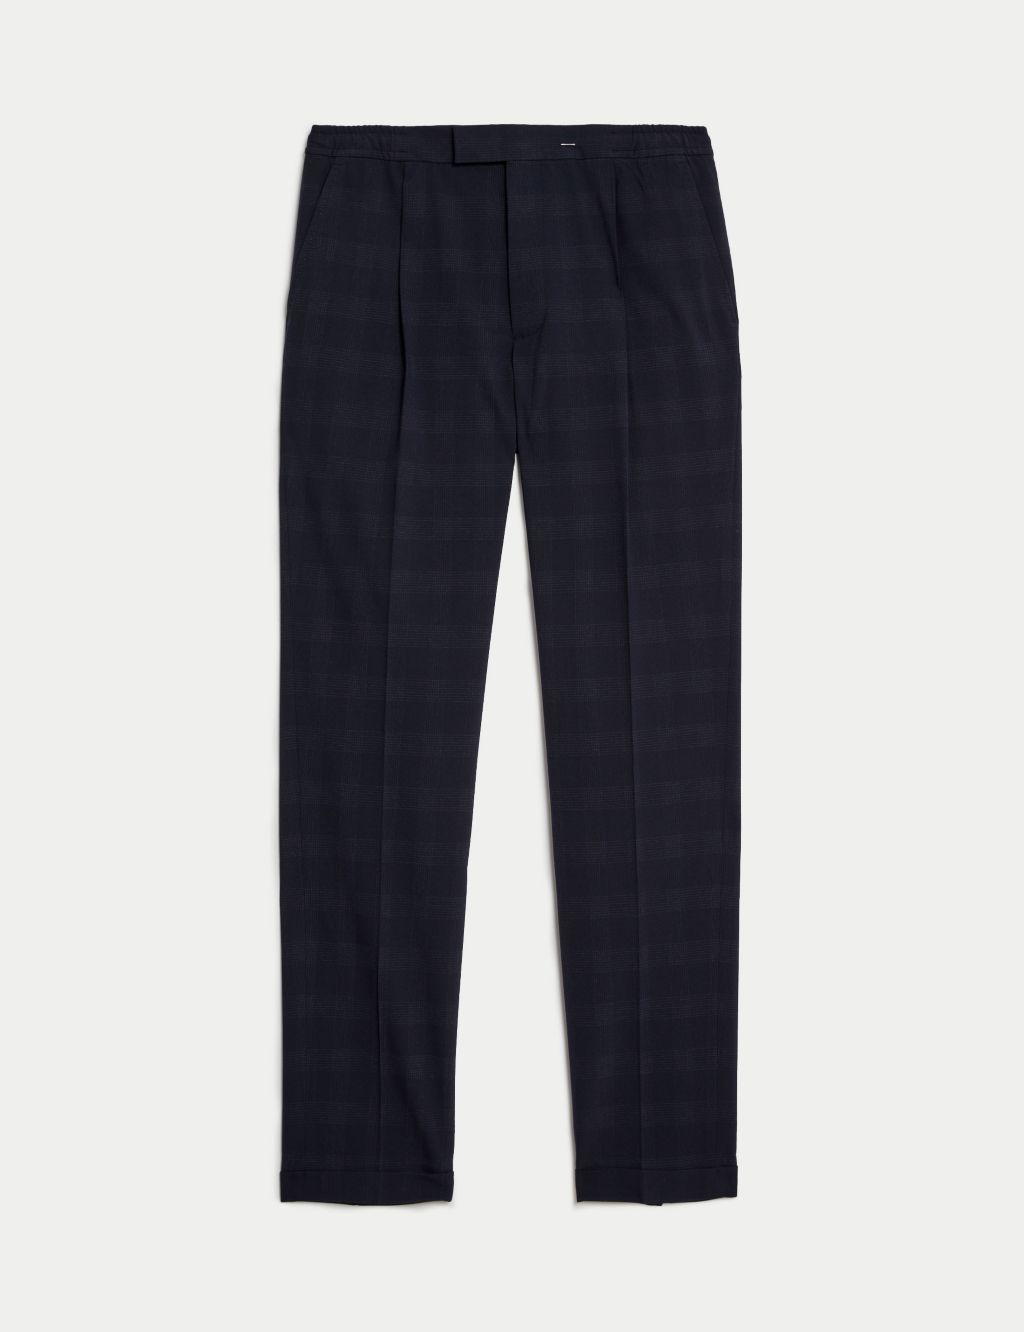 Check Single Pleat Elasticated Trousers | M&S Collection | M&S